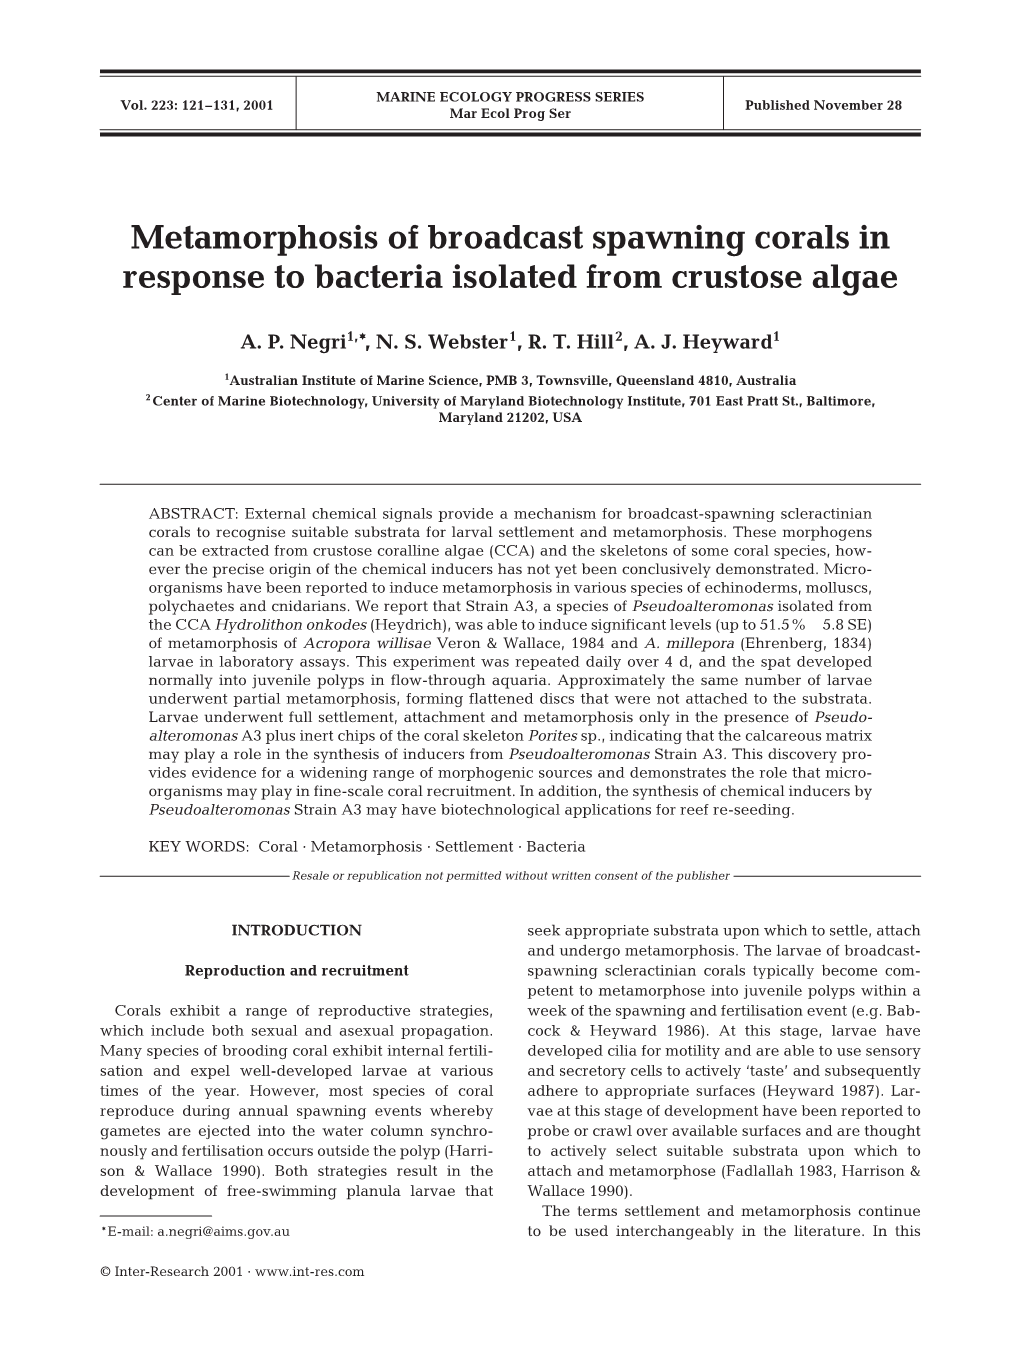 Metamorphosis of Broadcast Spawning Corals in Response to Bacteria Isolated from Crustose Algae